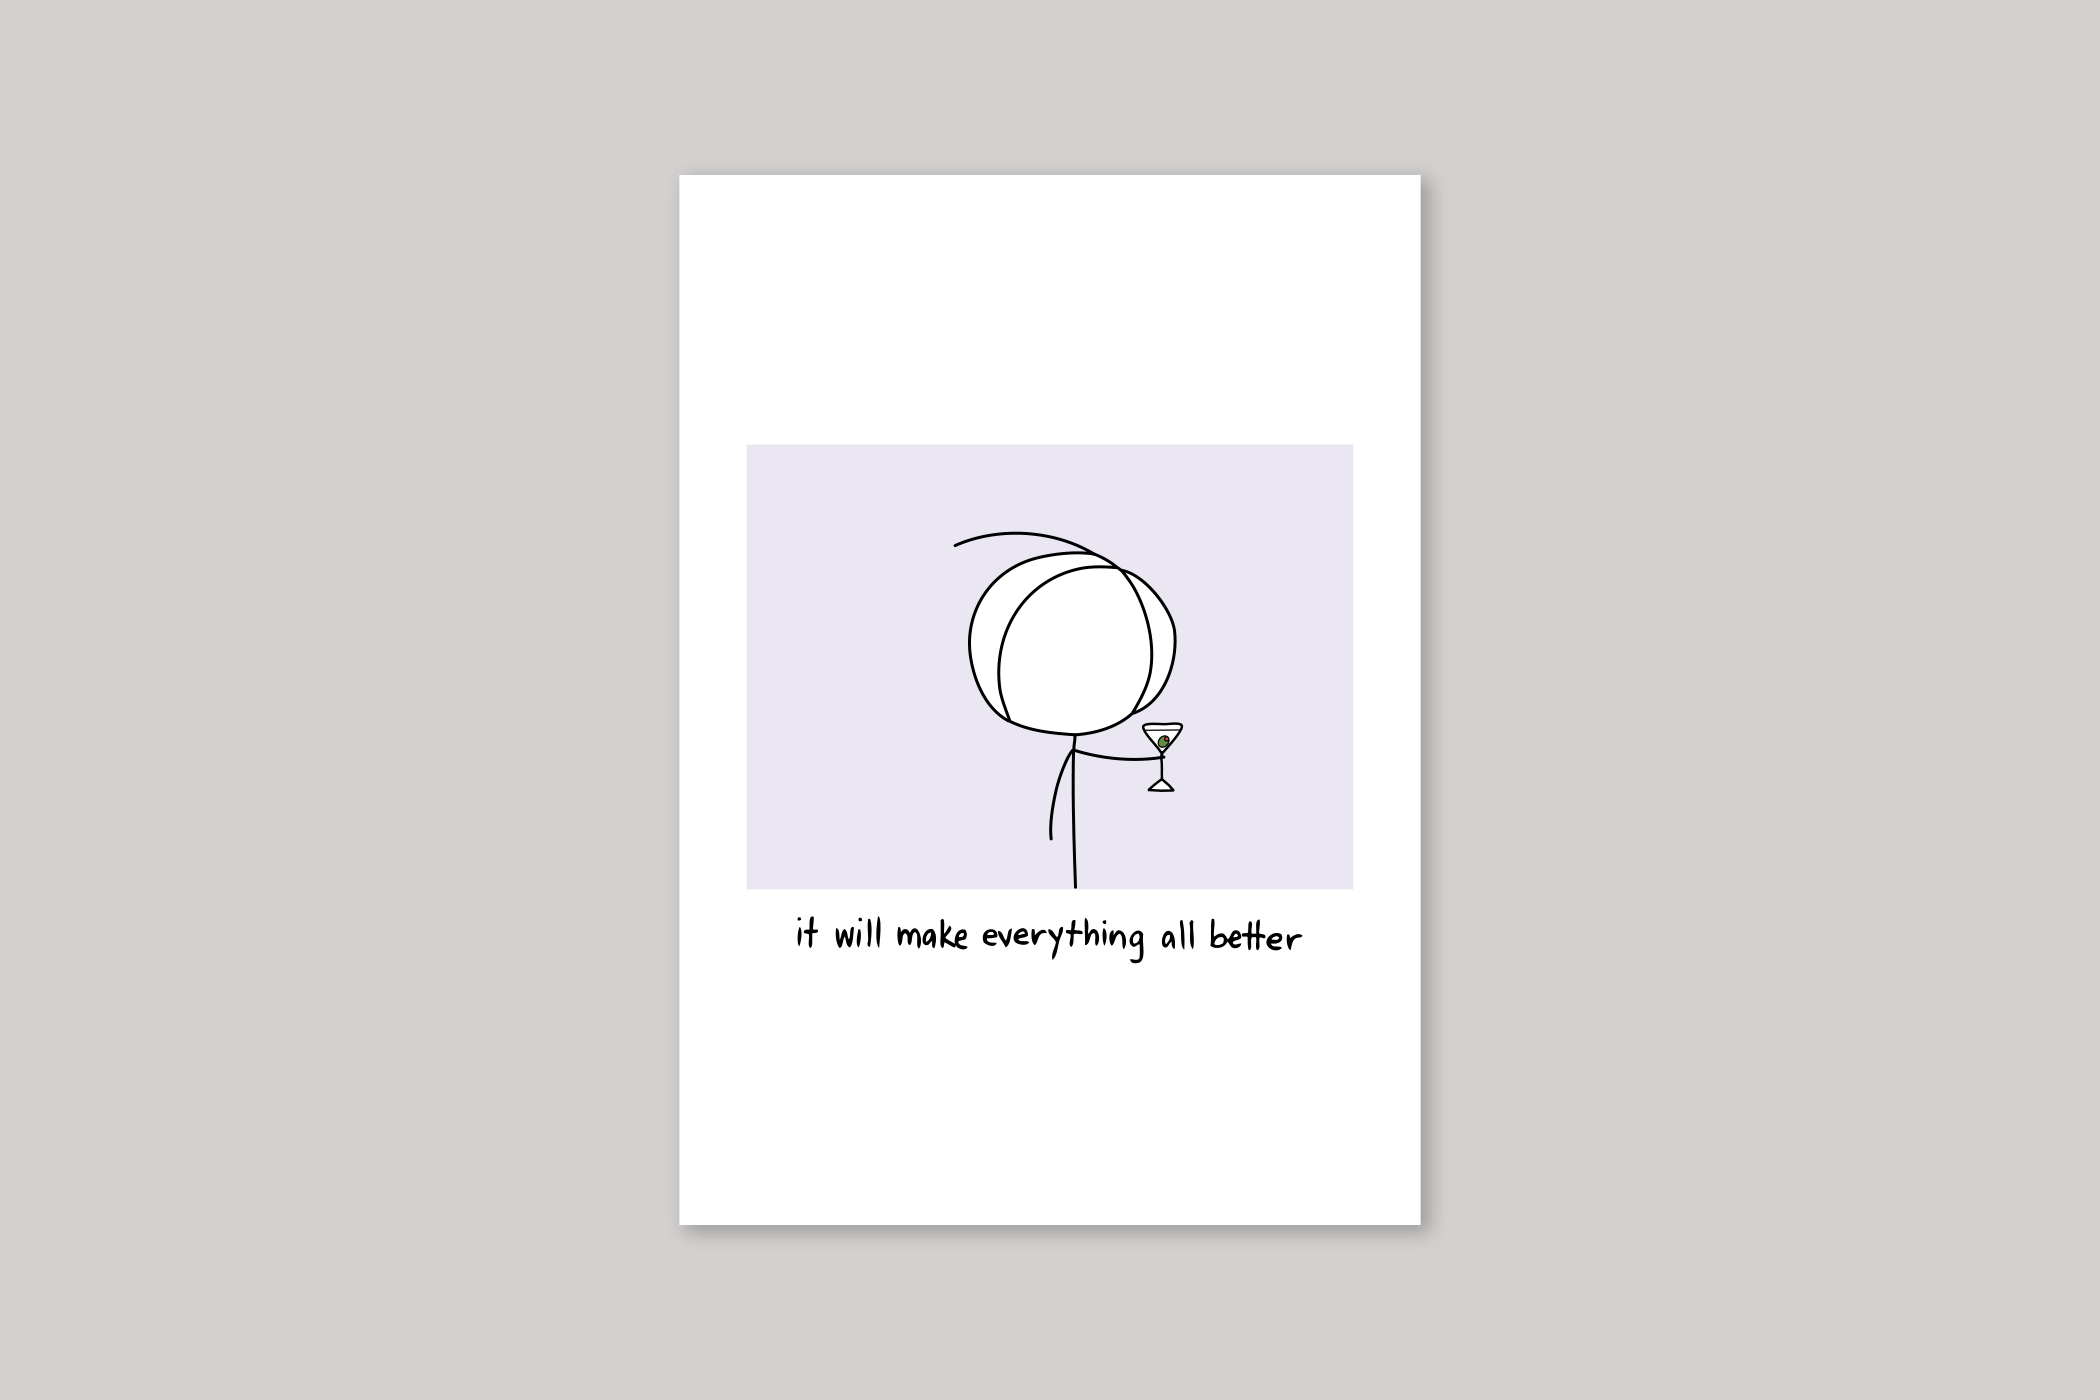 Make Everything Better humorous illustration from Mean Cards range of greeting cards by Icon.